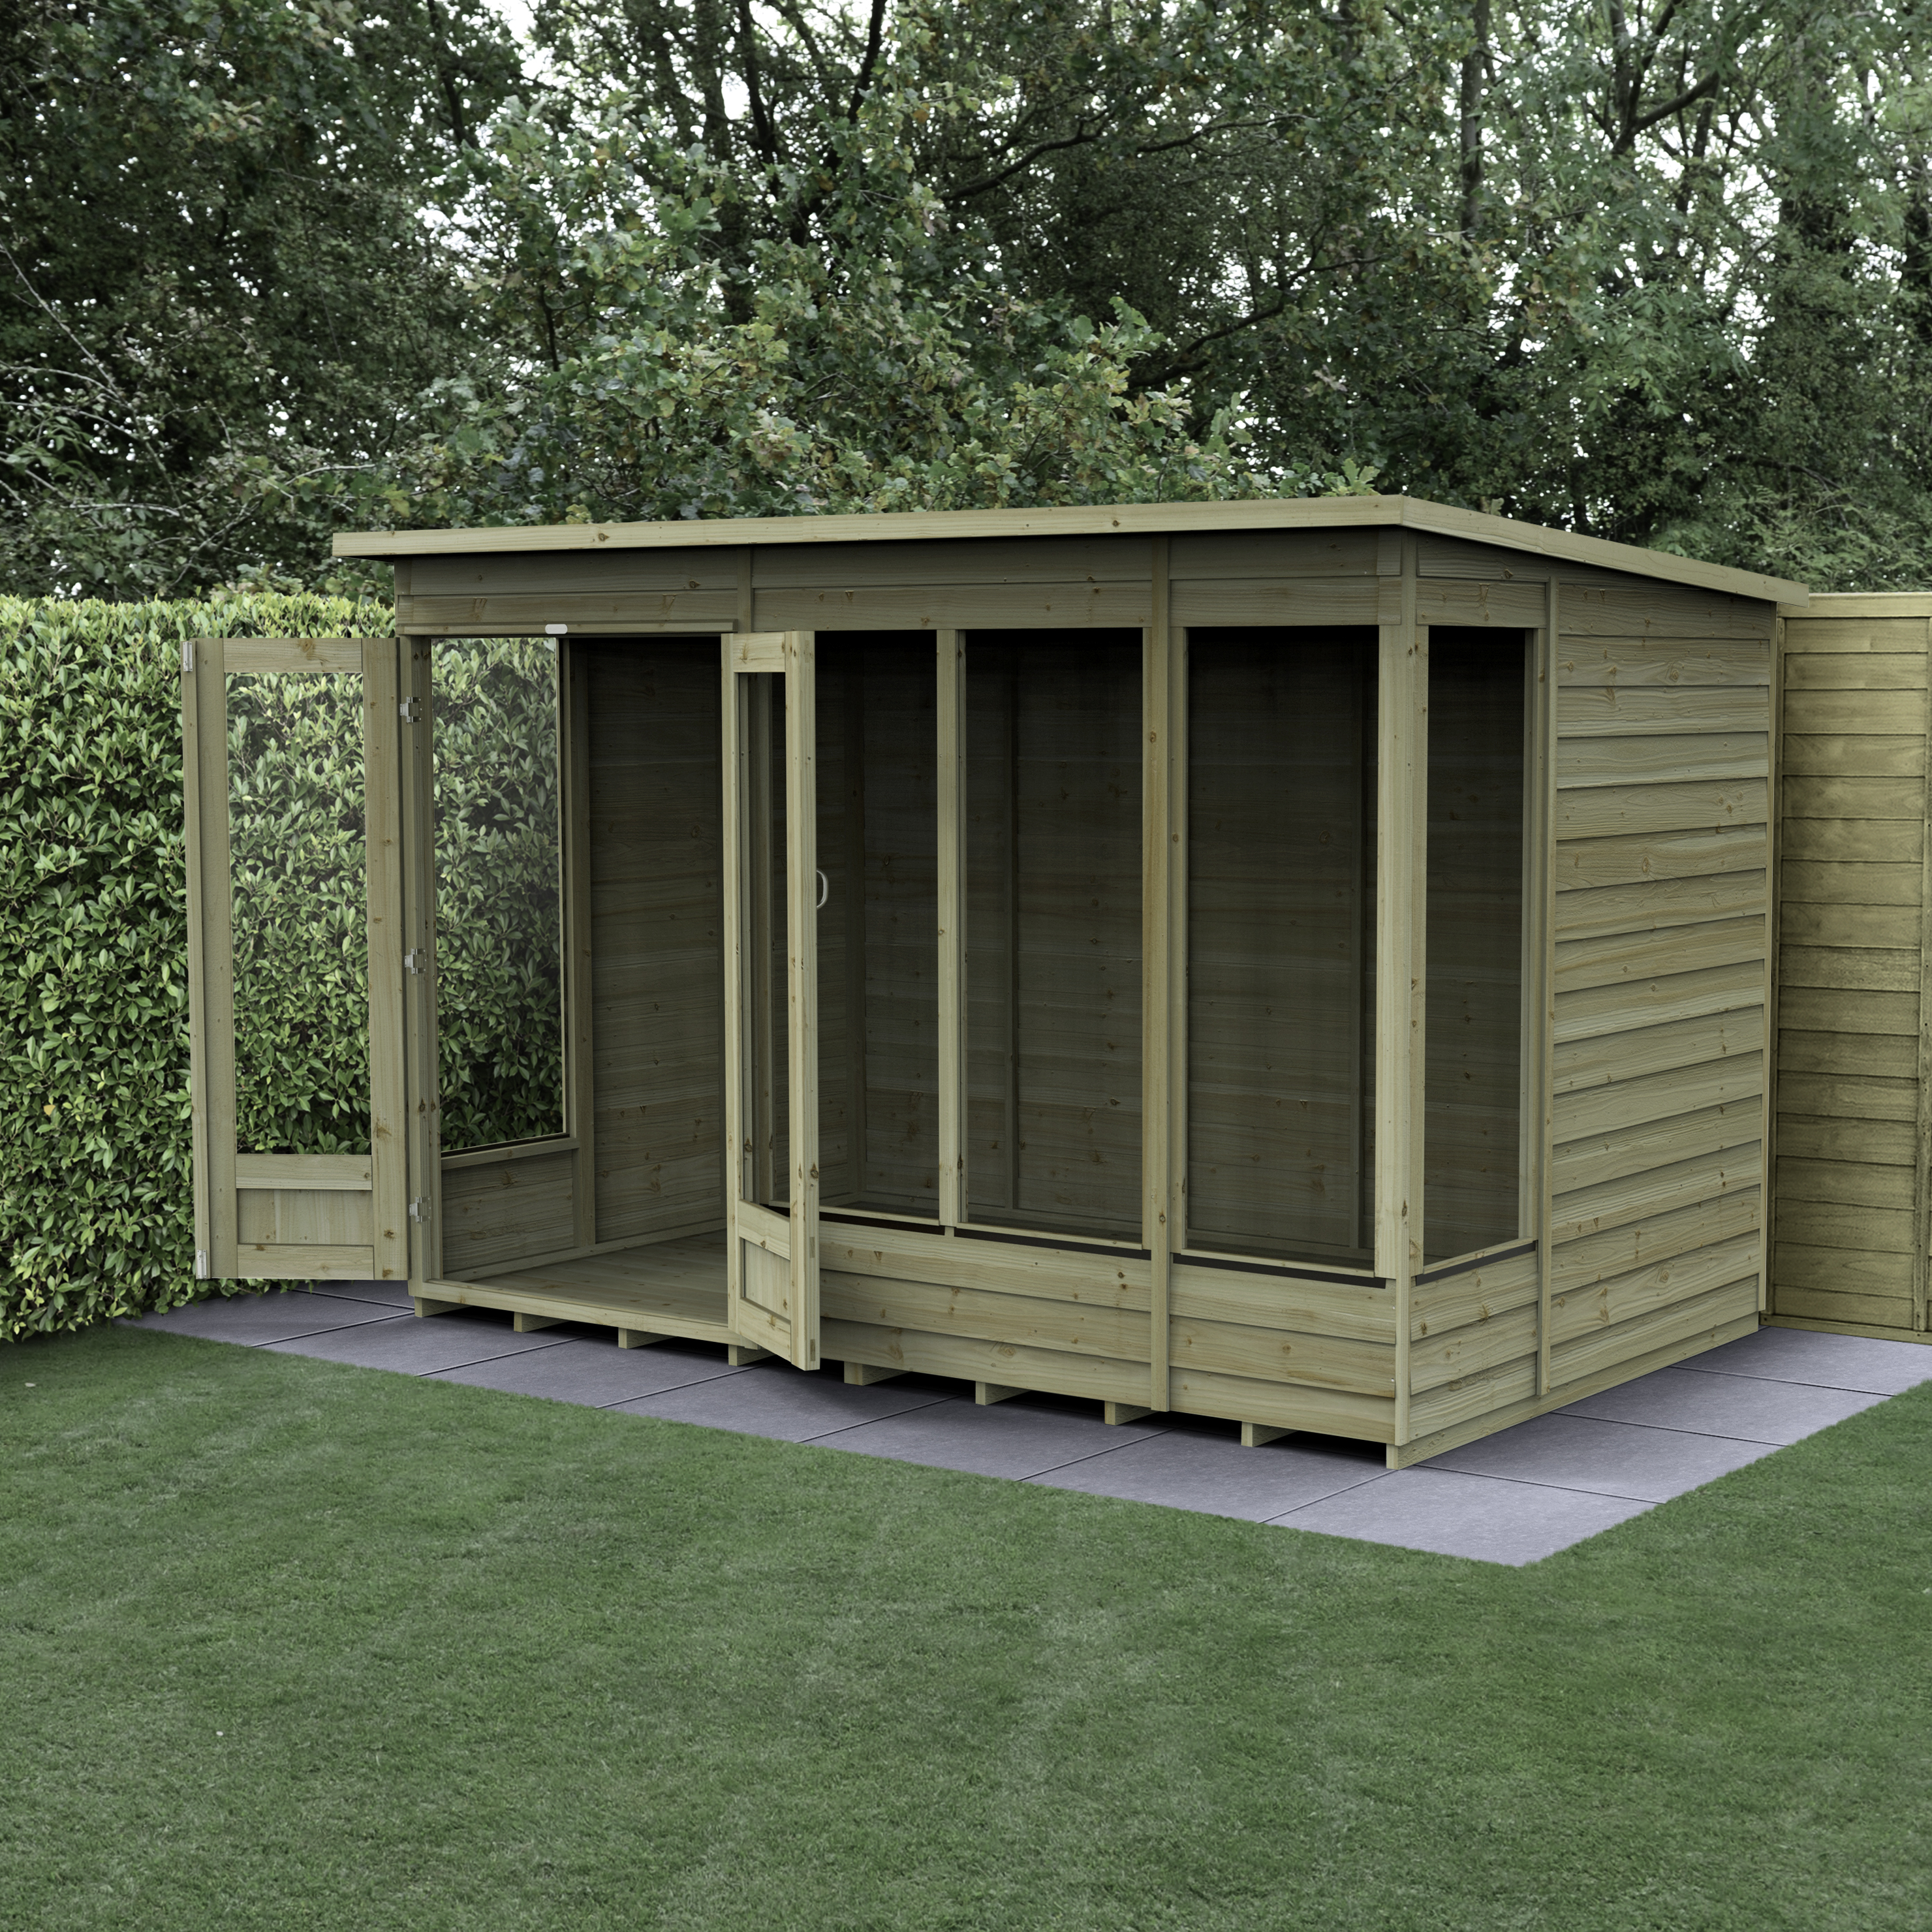 Image of Forest Garden 10x6 4Life Overlap Pent Pressure Treated Summerhouse